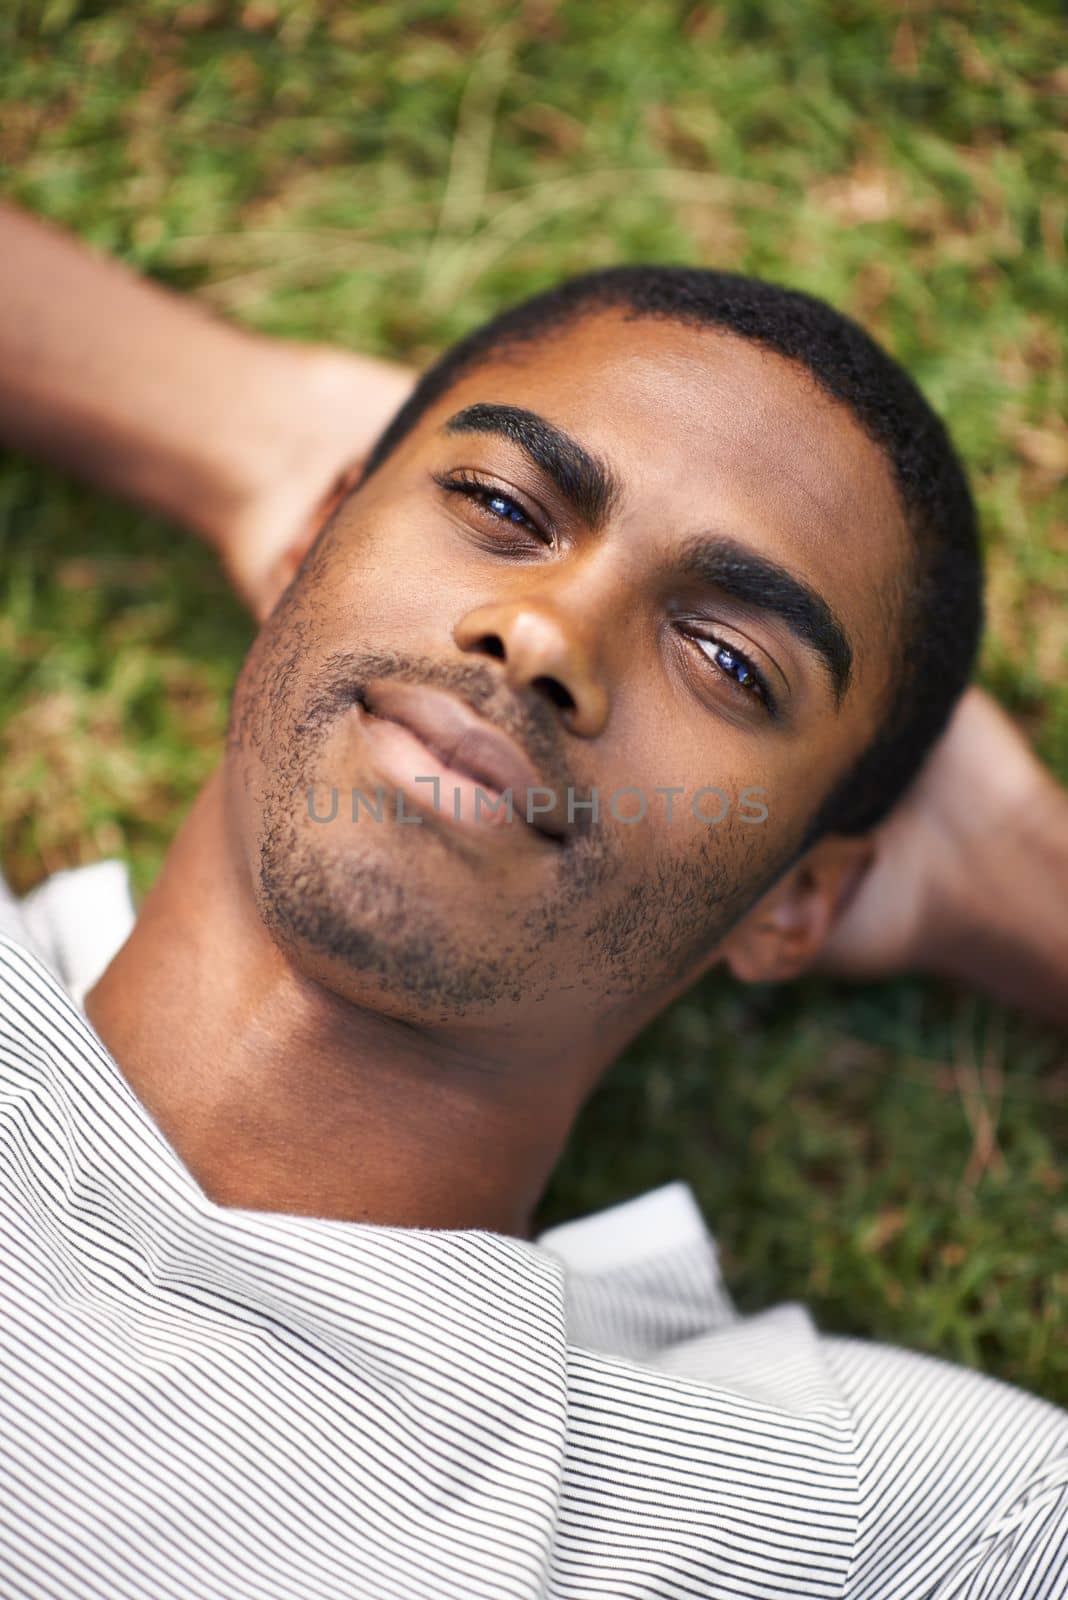 Taking in the sunshine. a handsome young man lying on the grass outdoors